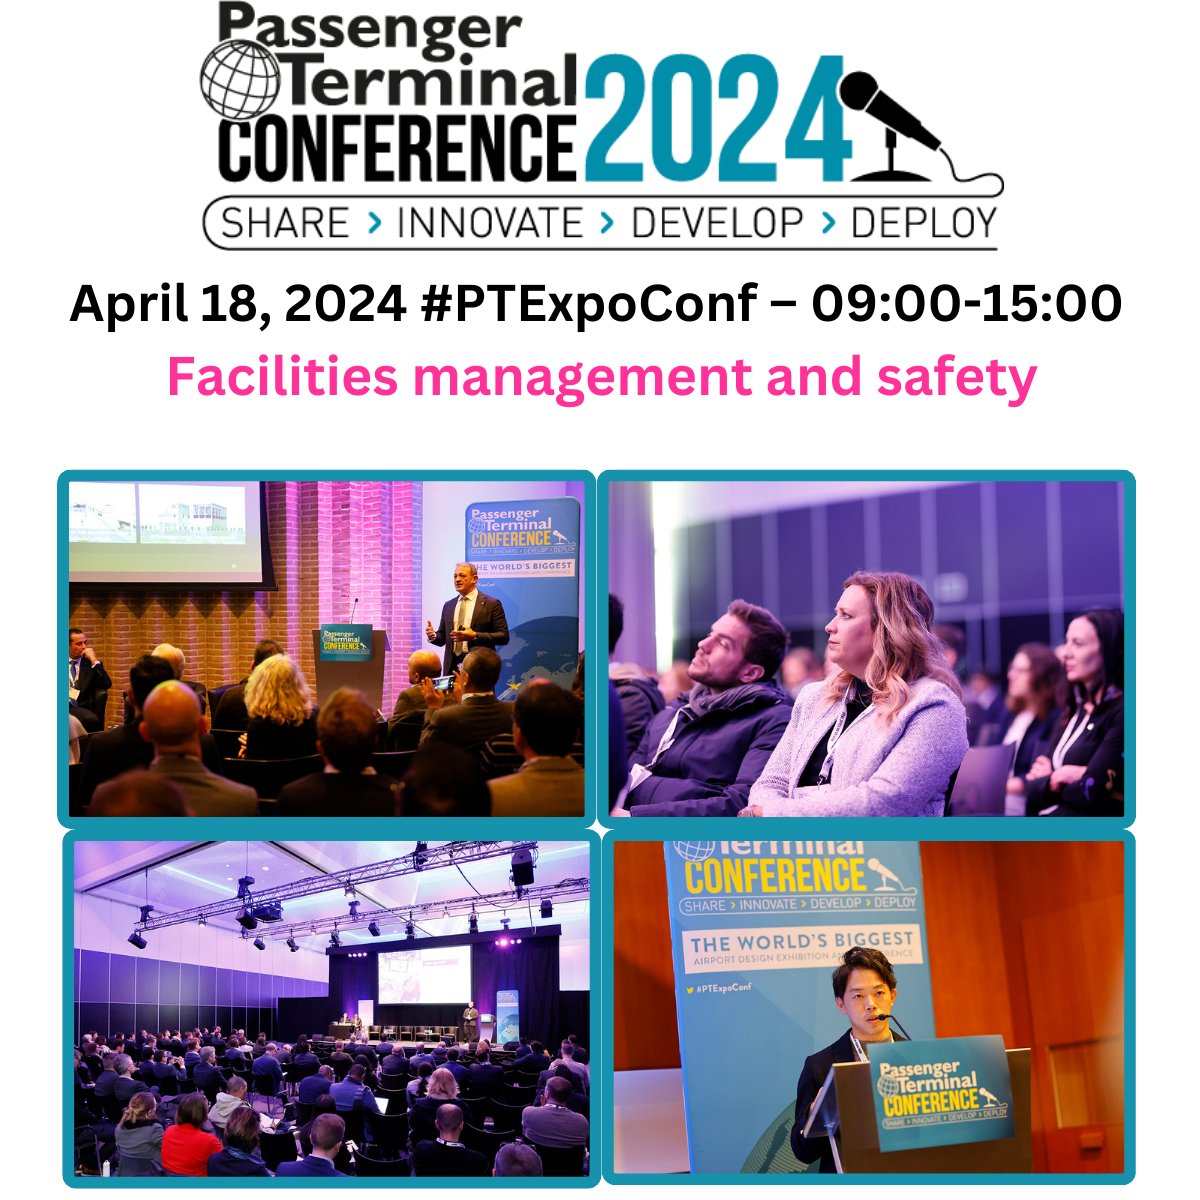 🔊 April 18, 2024 #PTExpoConf – 09:00-15:00 - ✈️ Facilities management and safety 🔊Passenger Terminal EXPO & CONFERENCE ✈️ Check out the latest line up! Book your place today ➡️: bit.ly/48PXiUI View the full conference program ➡️: bit.ly/3TPvMCu